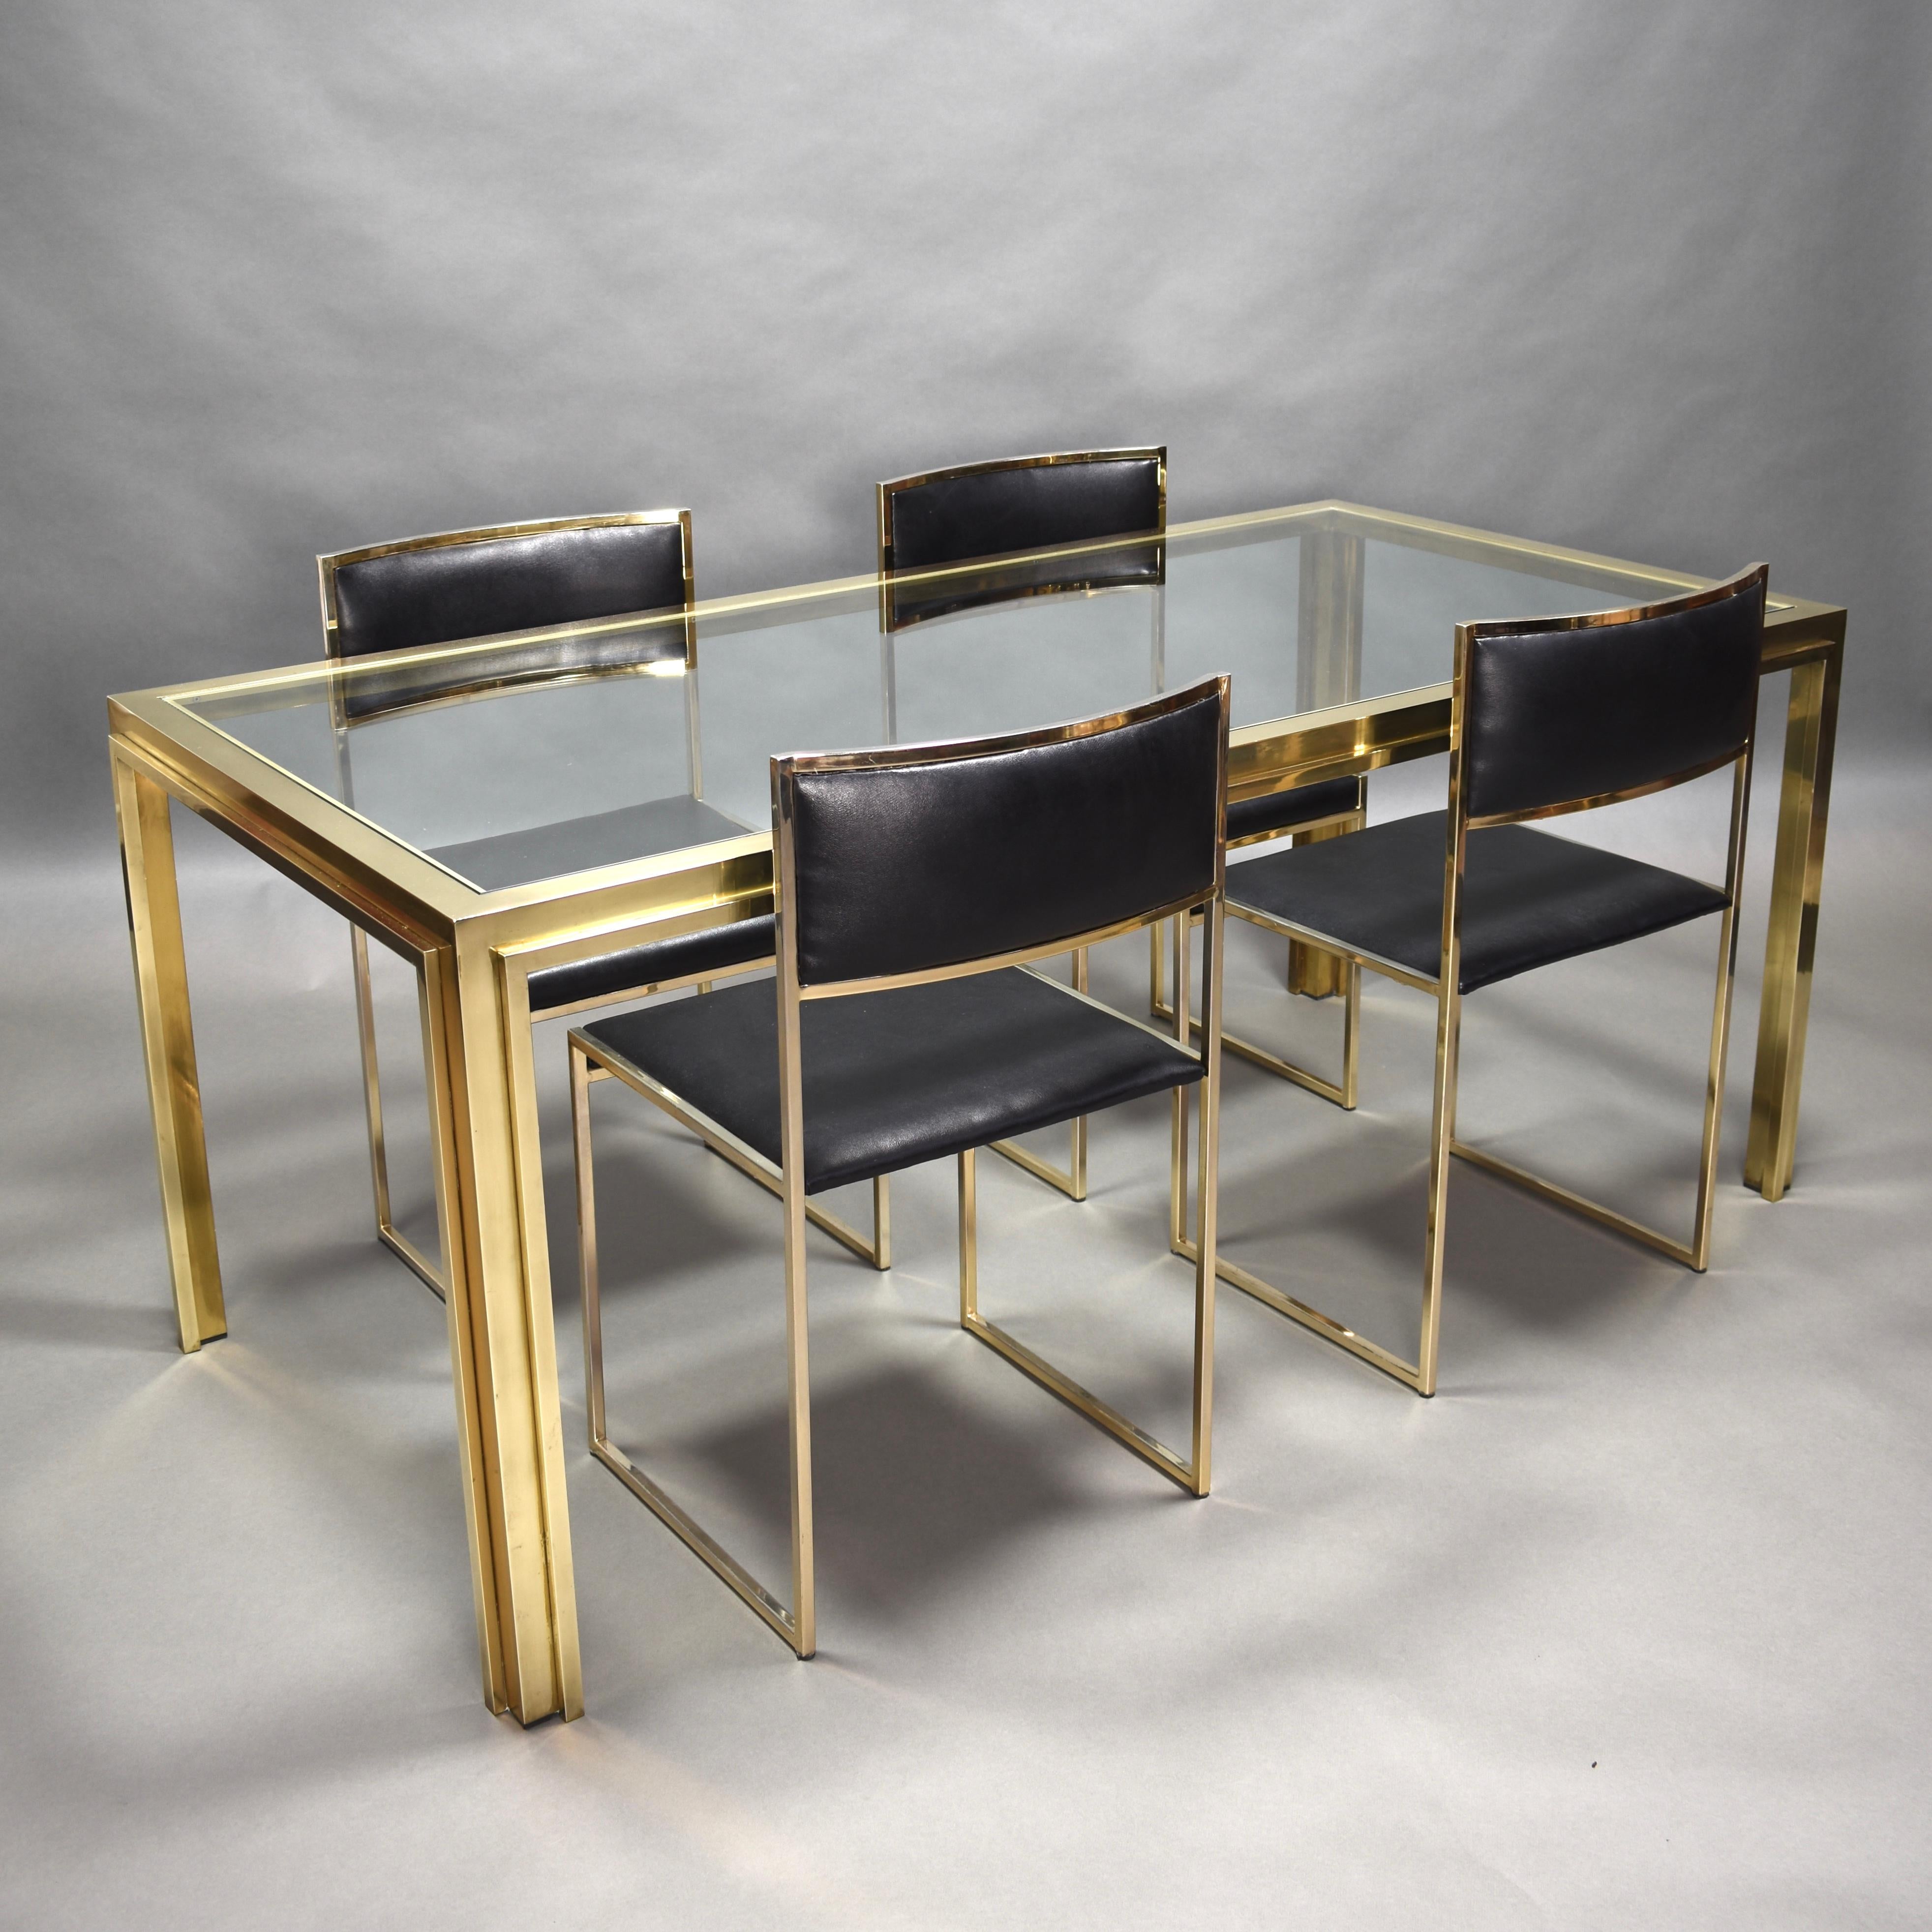 Exclusive and rare set of four 24-karat gold-plated dining chairs by Willy Rizzo, Italy, circa 1970. 
The table is made of solid brass and clear glass and was designed by an unknown designer, but the chairs and table match very well